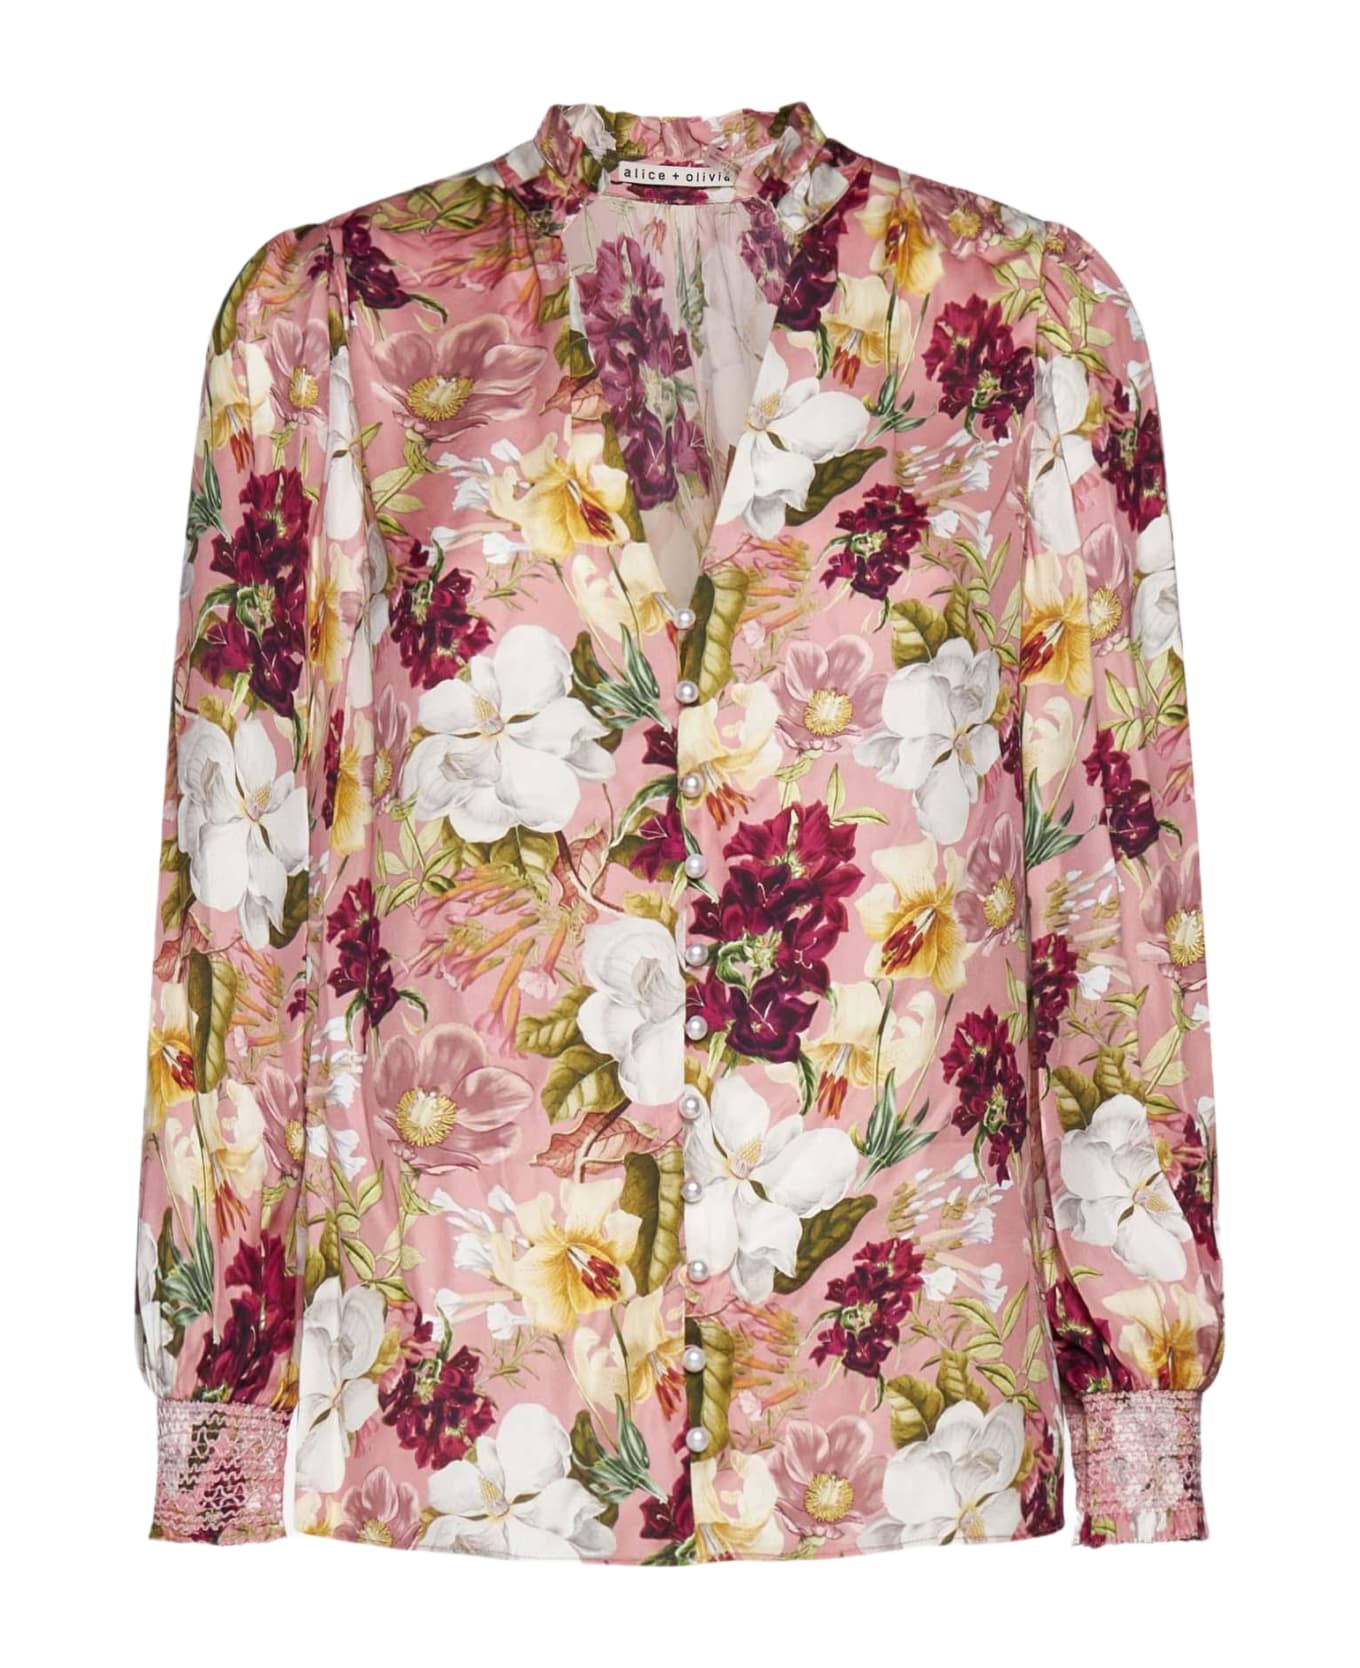 Alice + Olivia Reilly Floral Print Viscose Blouse - Floral Rose ブラウス